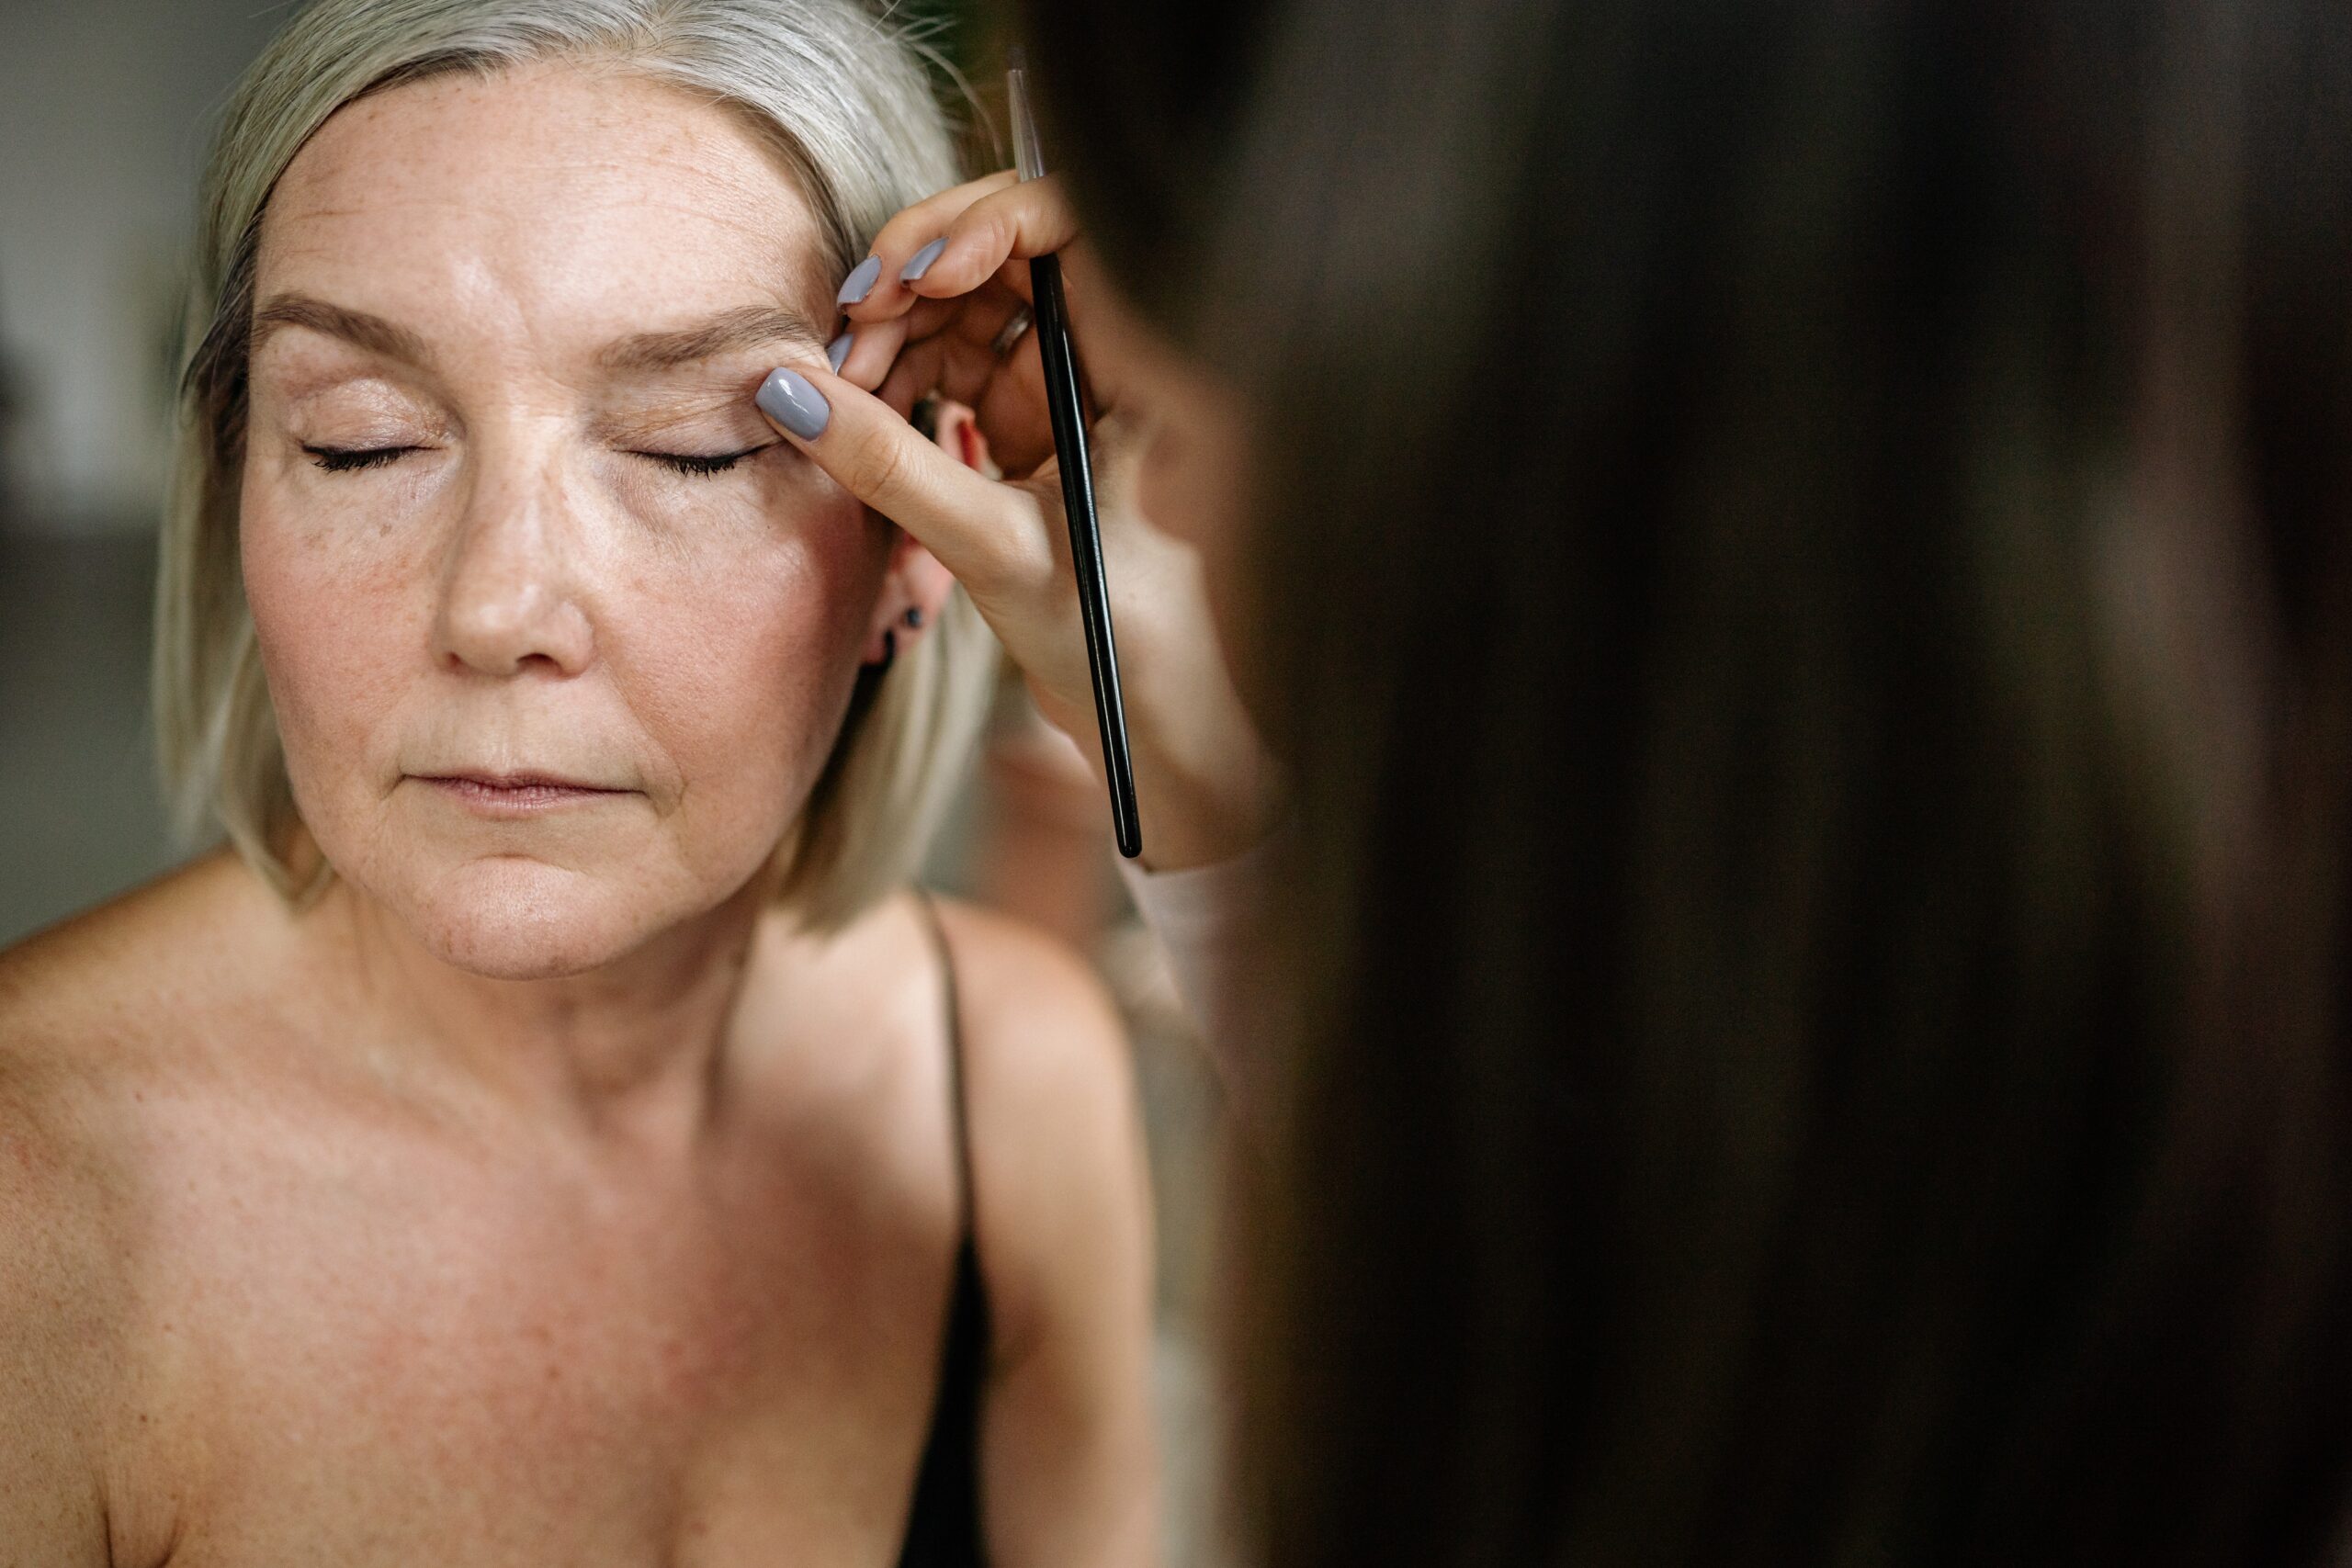 To lift drooping eyelids and rejuvenate eyes after 40 years, this gorgeous eye make-up simply de-populates